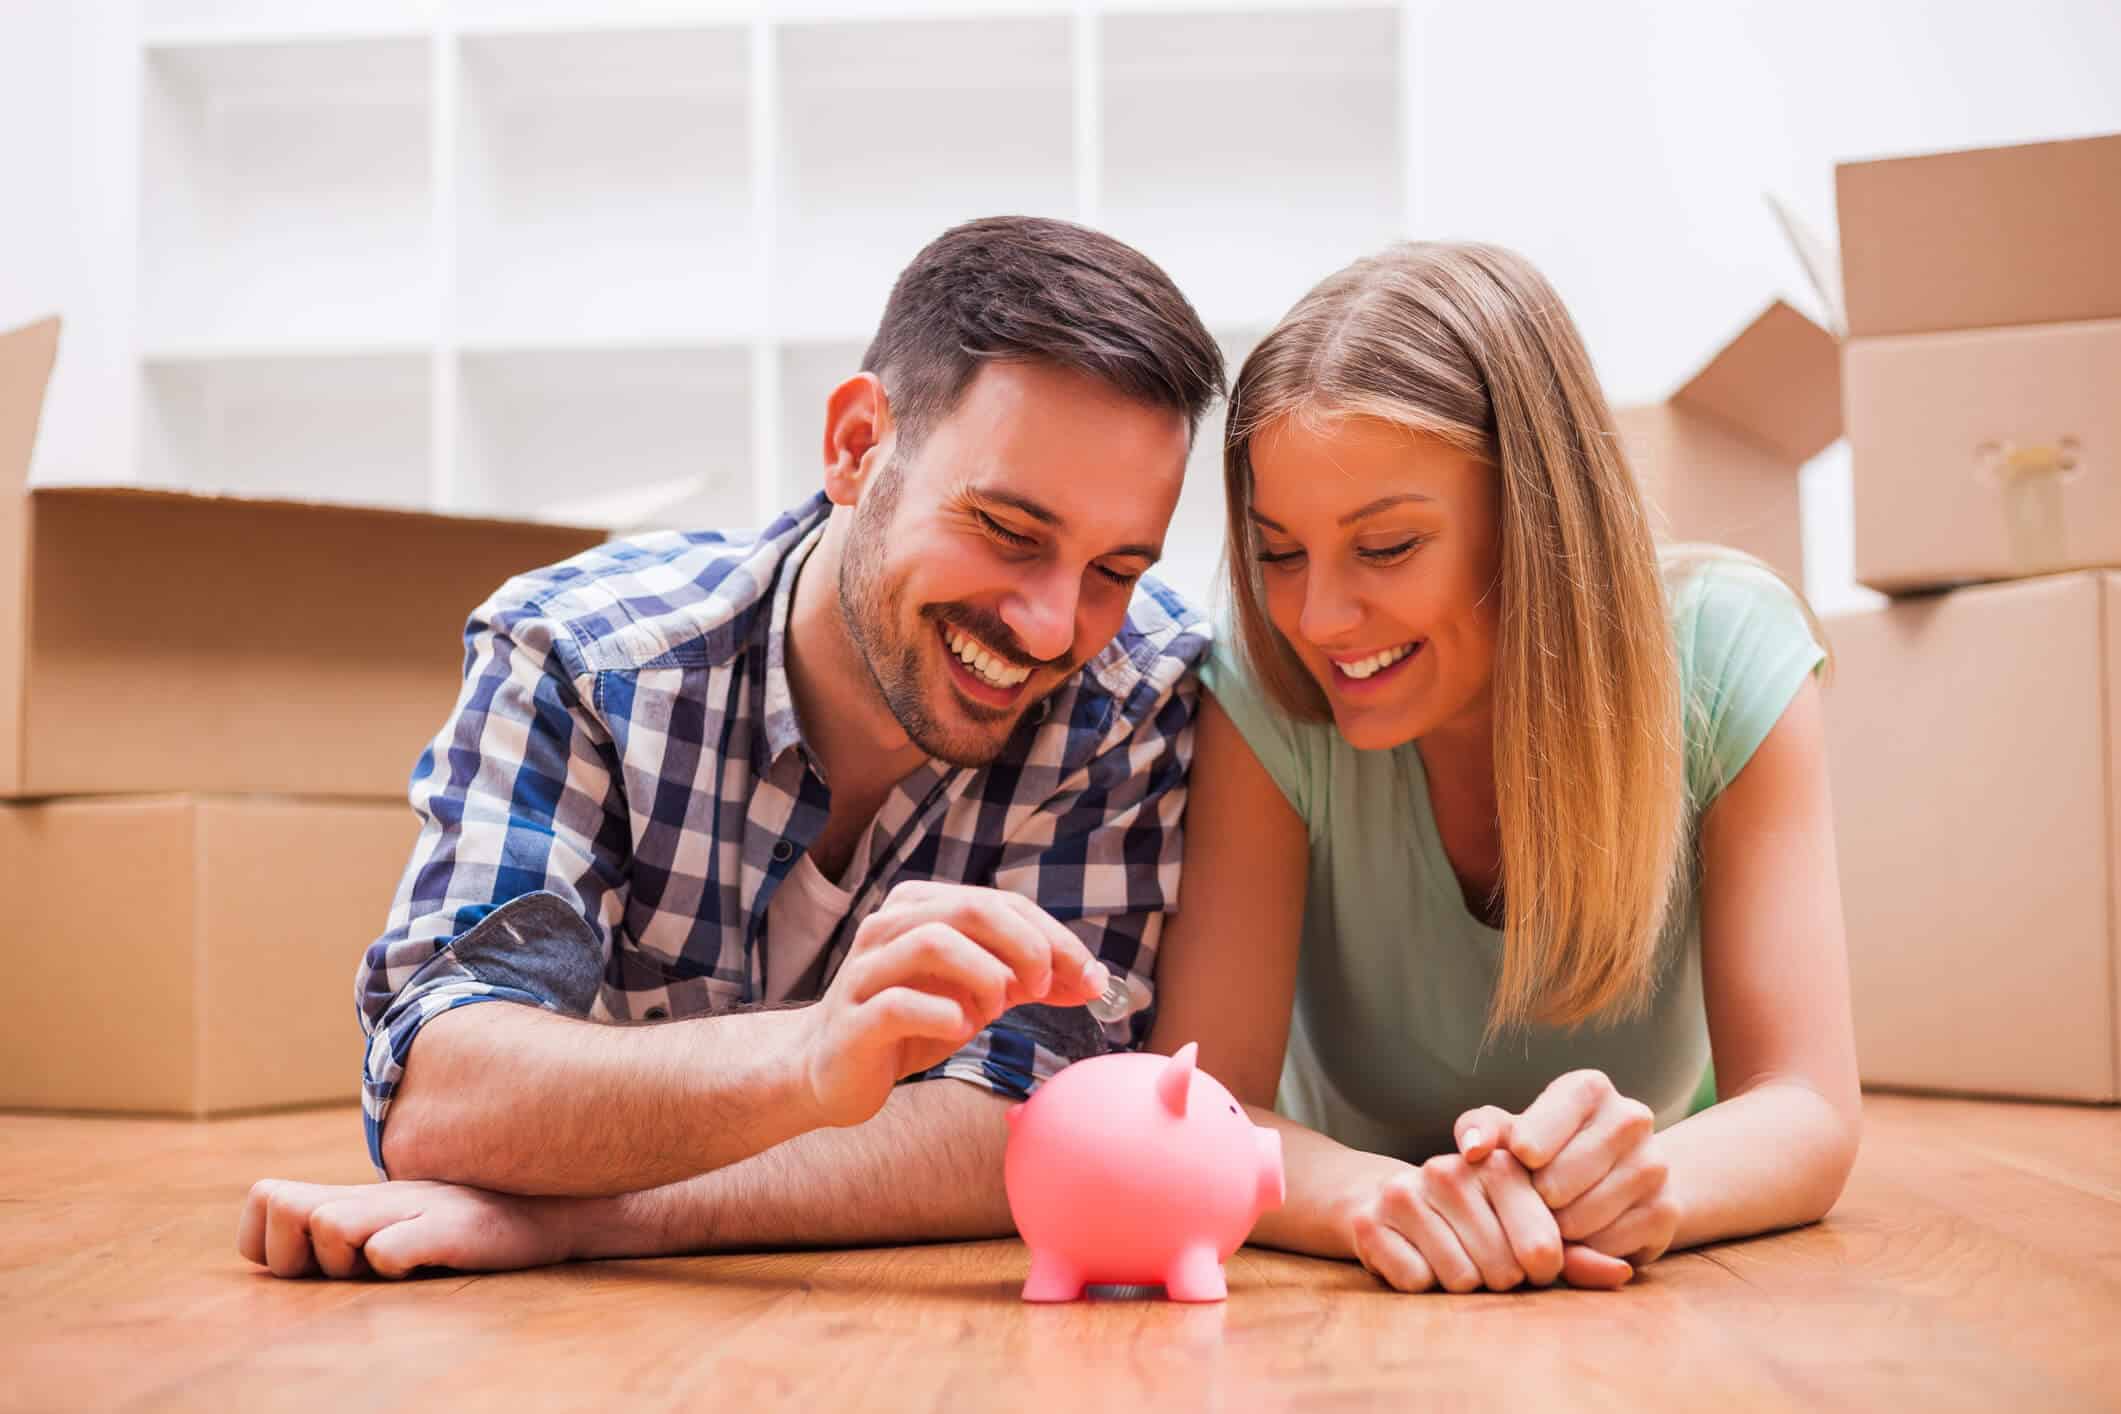 two people lying on a floor putting coins in a piggy bank